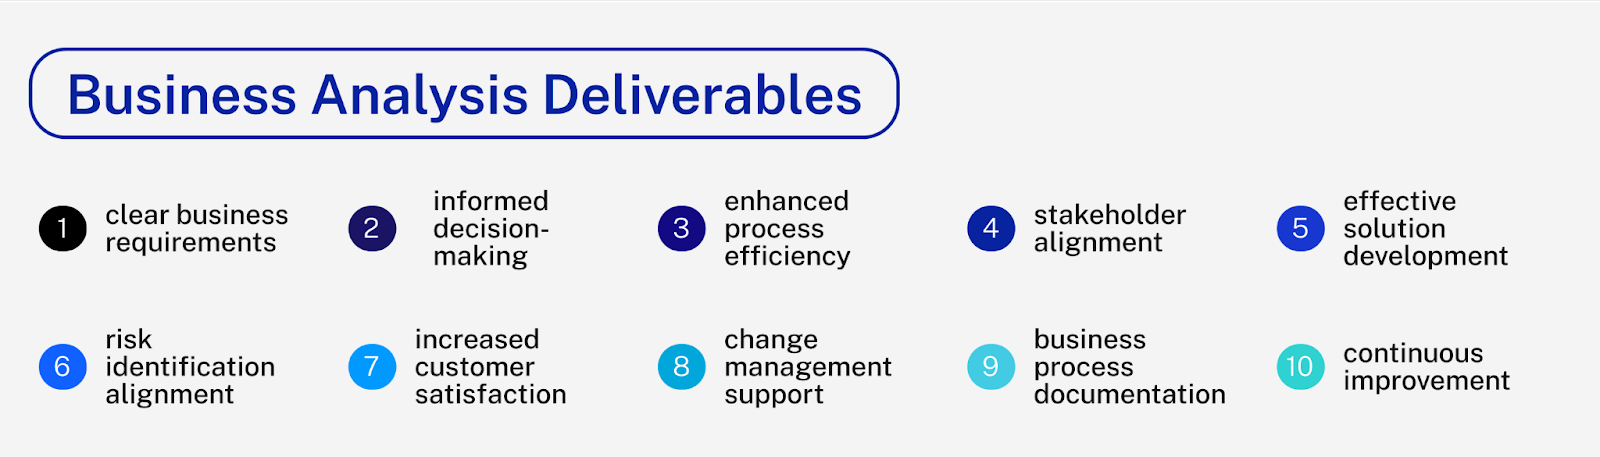 BUSINESS-ANALYSIS-DELIVERABLES